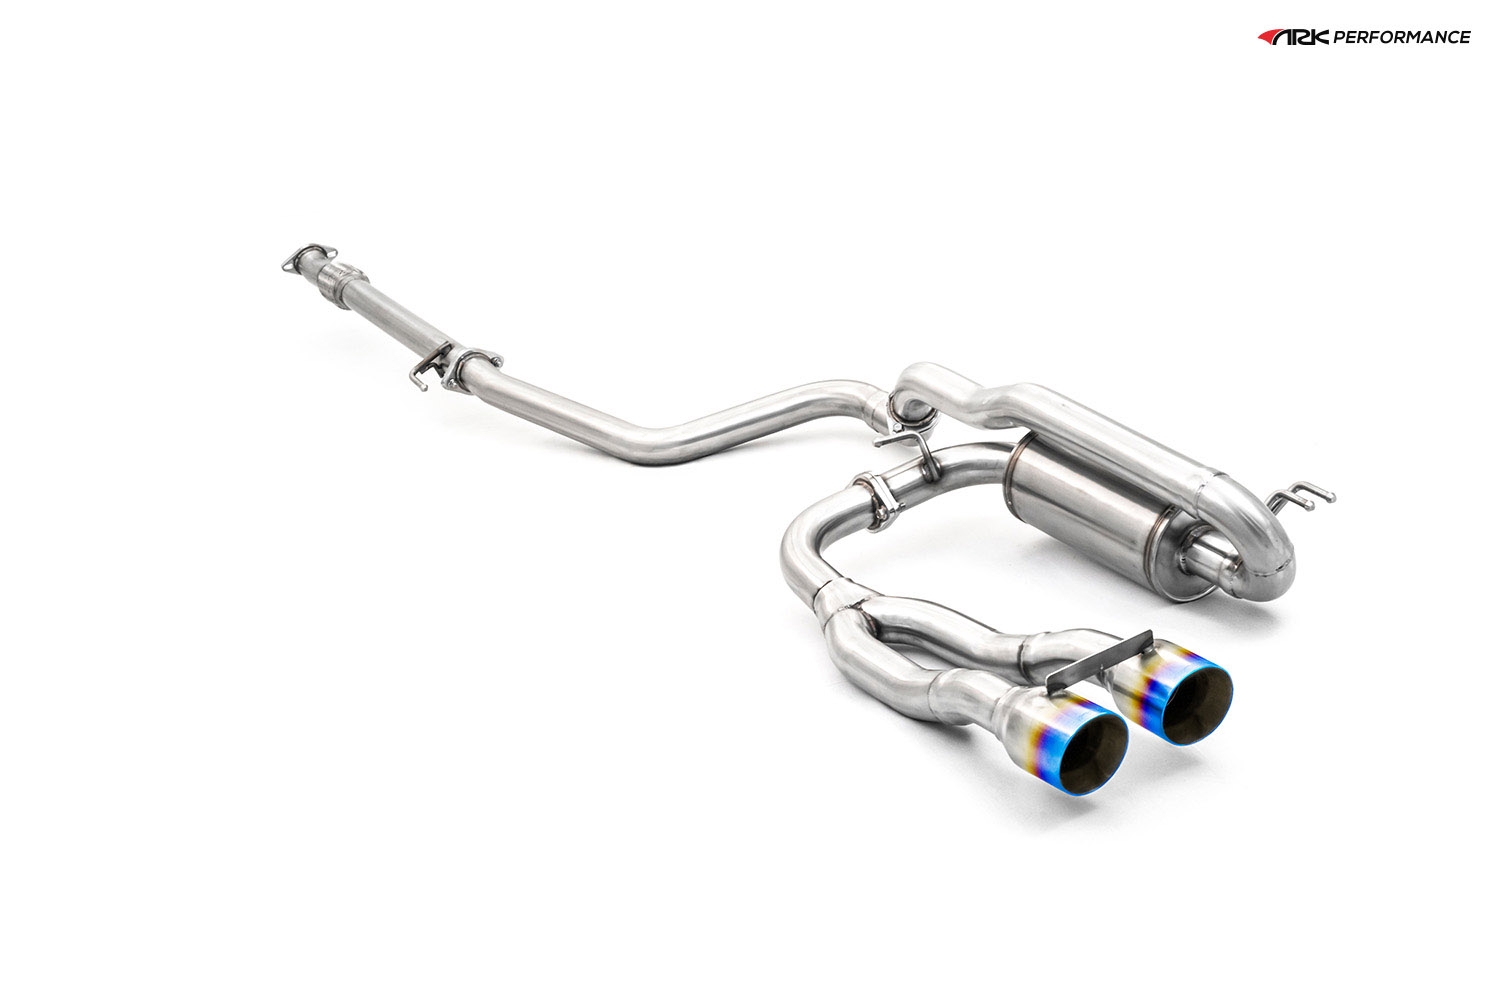 Ark Performance Stainless Steel DT-S Cat-Back Exhaust System 2.5in Pipe w/ 4.0 Burnt Dual Tip, Single Exit - Hyundai Veloster Turbo 13-17 1.6L I4 Turbo FS